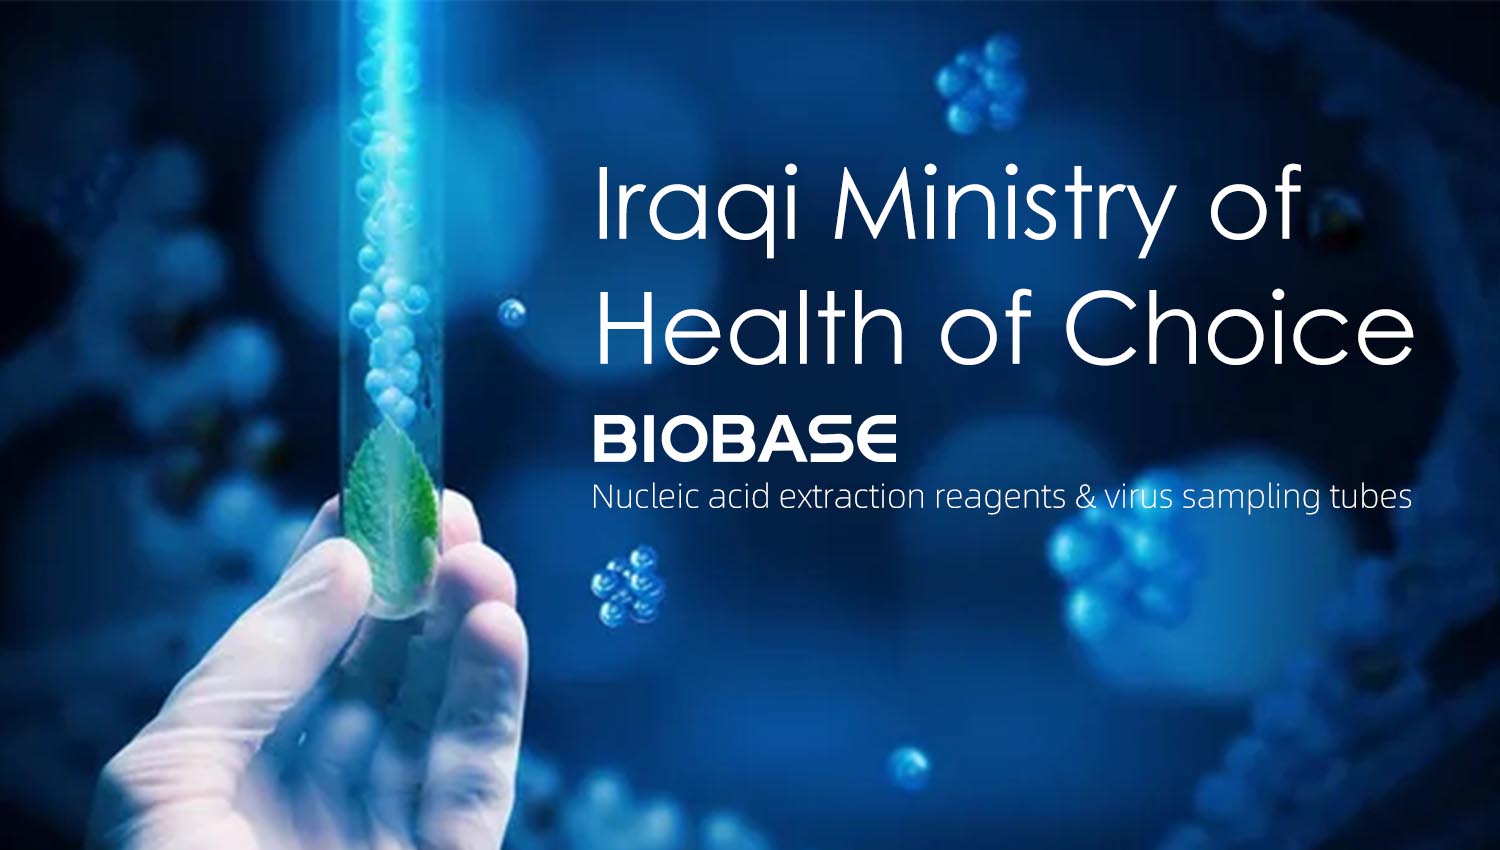 Nucleic acid extraction reagents and virus sampling tubes are sent to Iraq Iraqi Ministry of Health of Choice